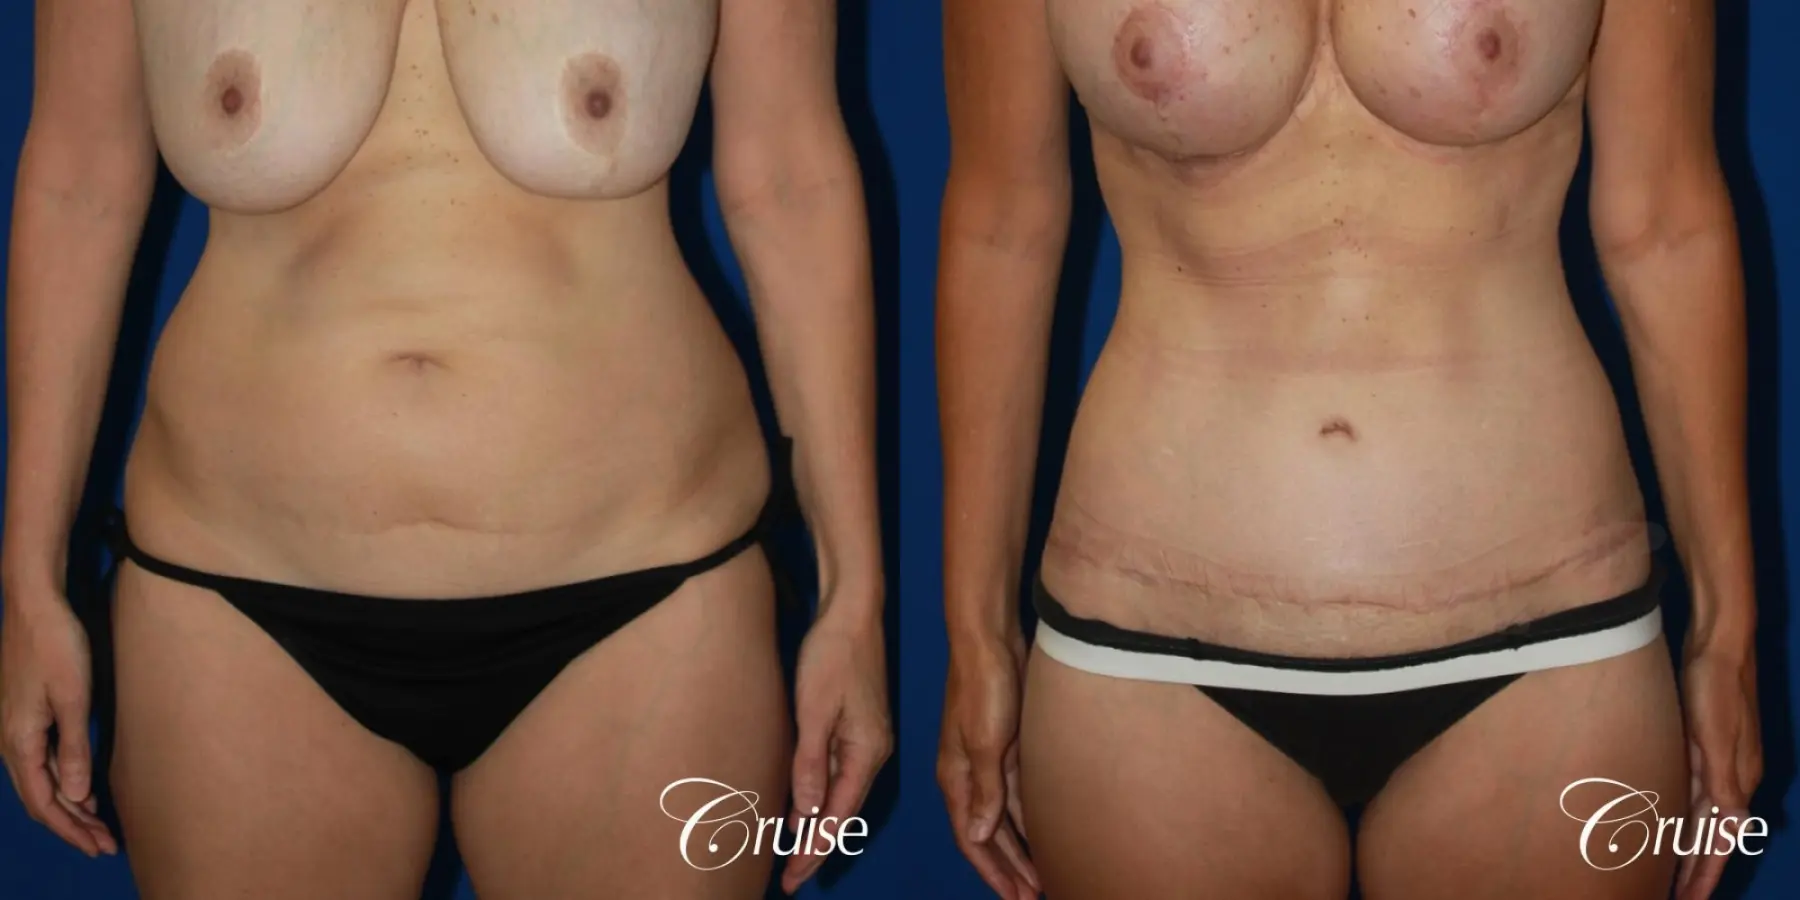 47 Yr Old Liposuction & Circumferential Incision Tummy Tuck - Before and After 1